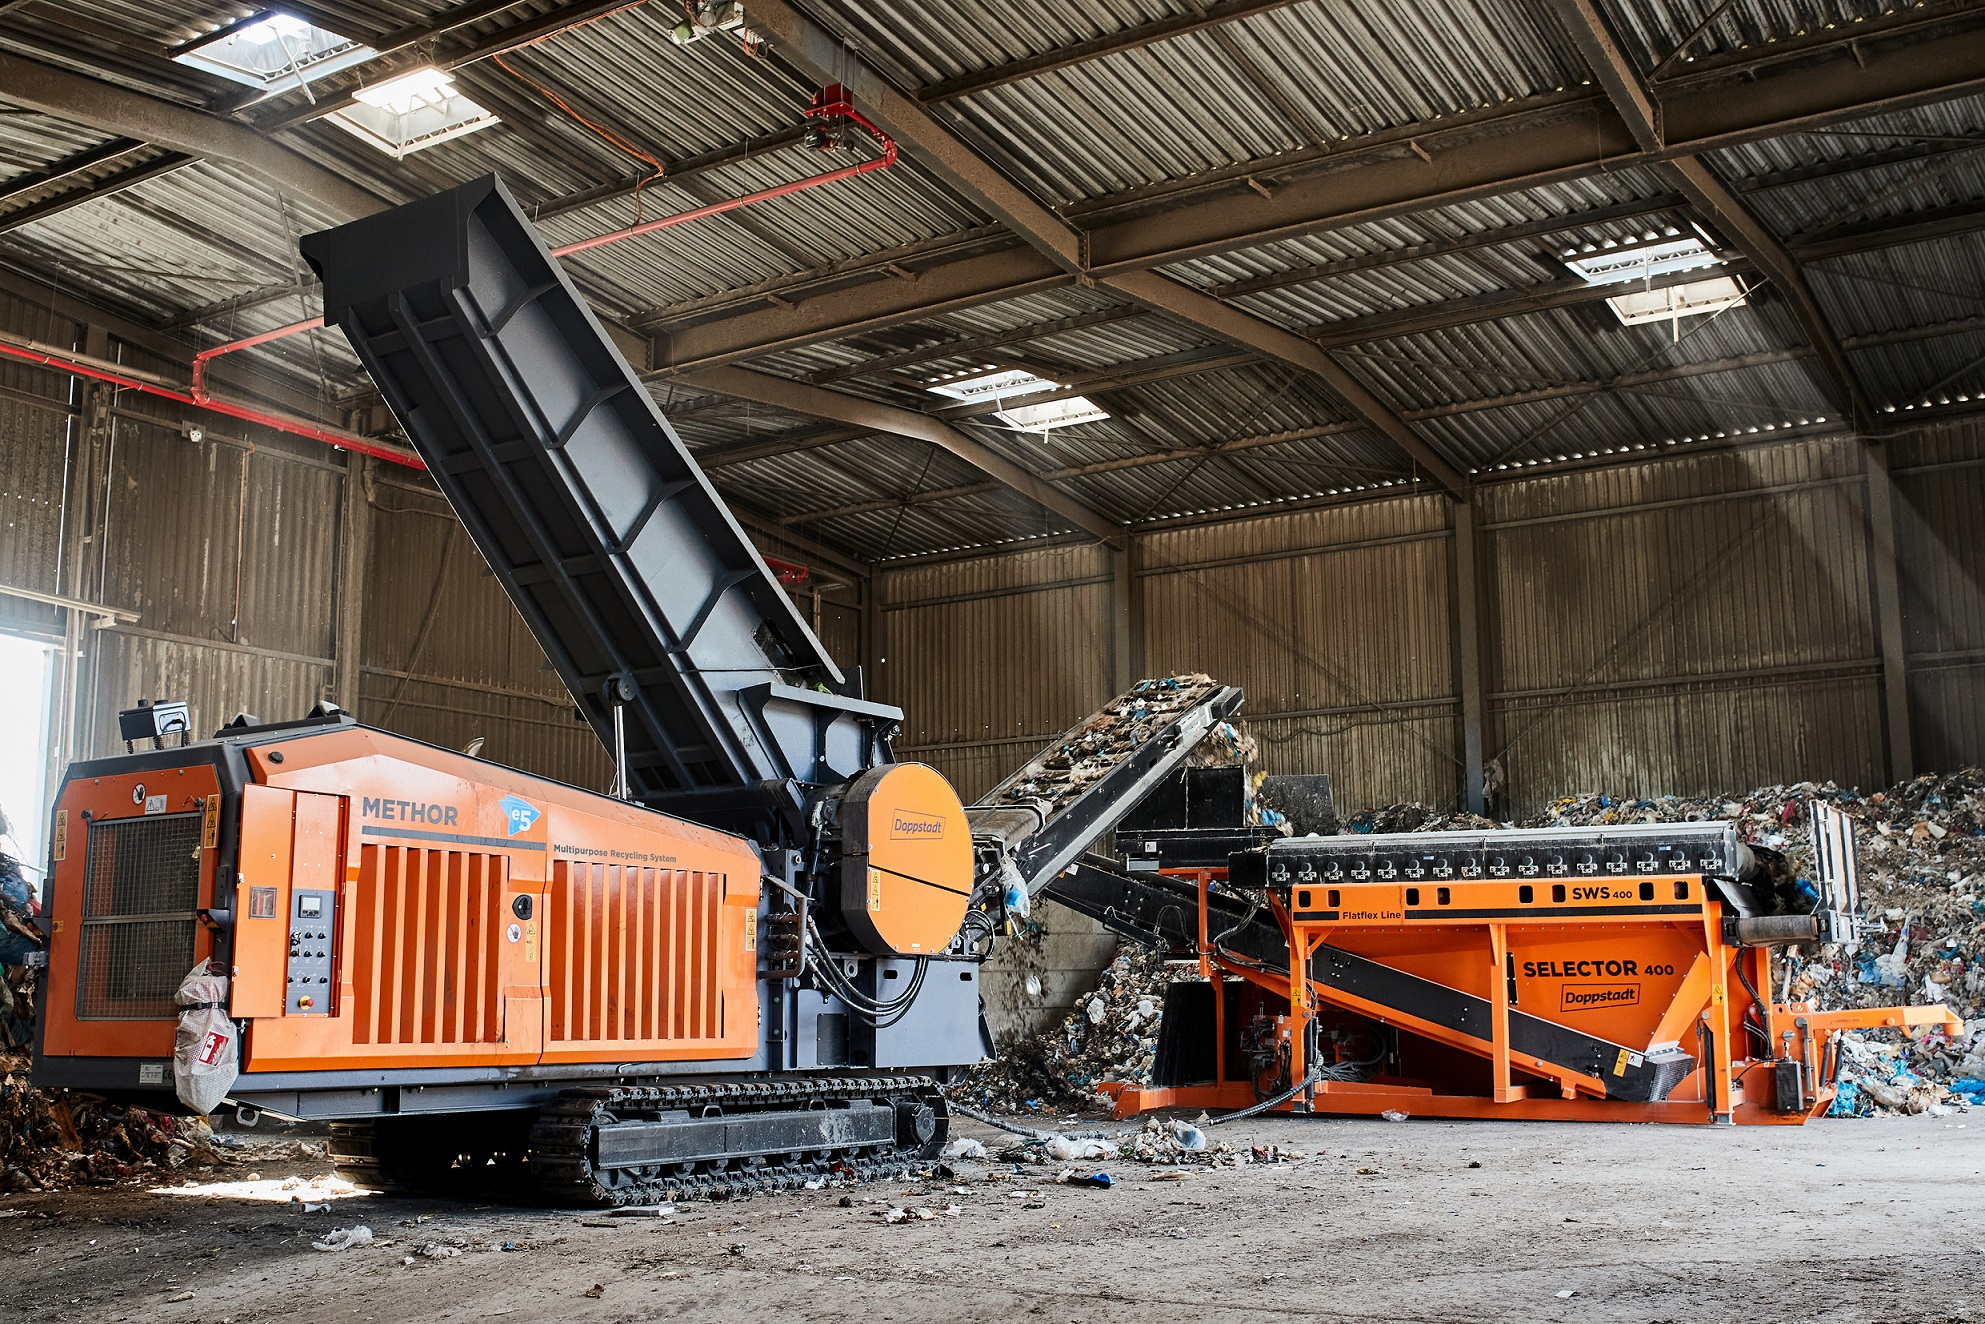 Thanks to the smart combination of individual machines, the operators benefit from higher plant operating efficiency and a quick return on investment.